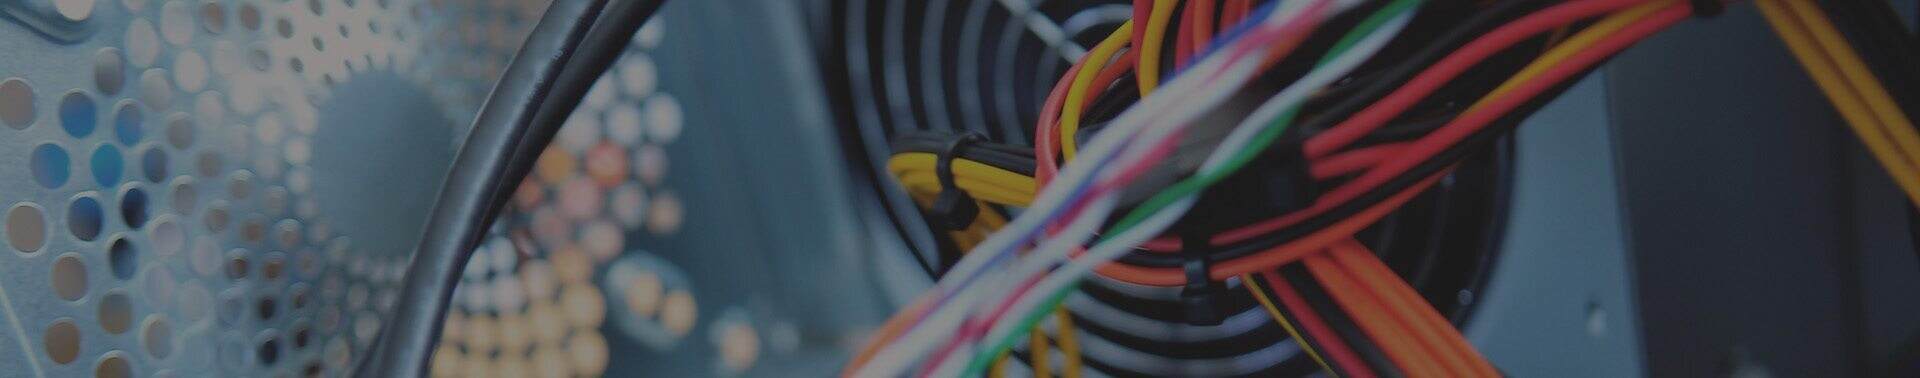 A close up image of wires and cables.